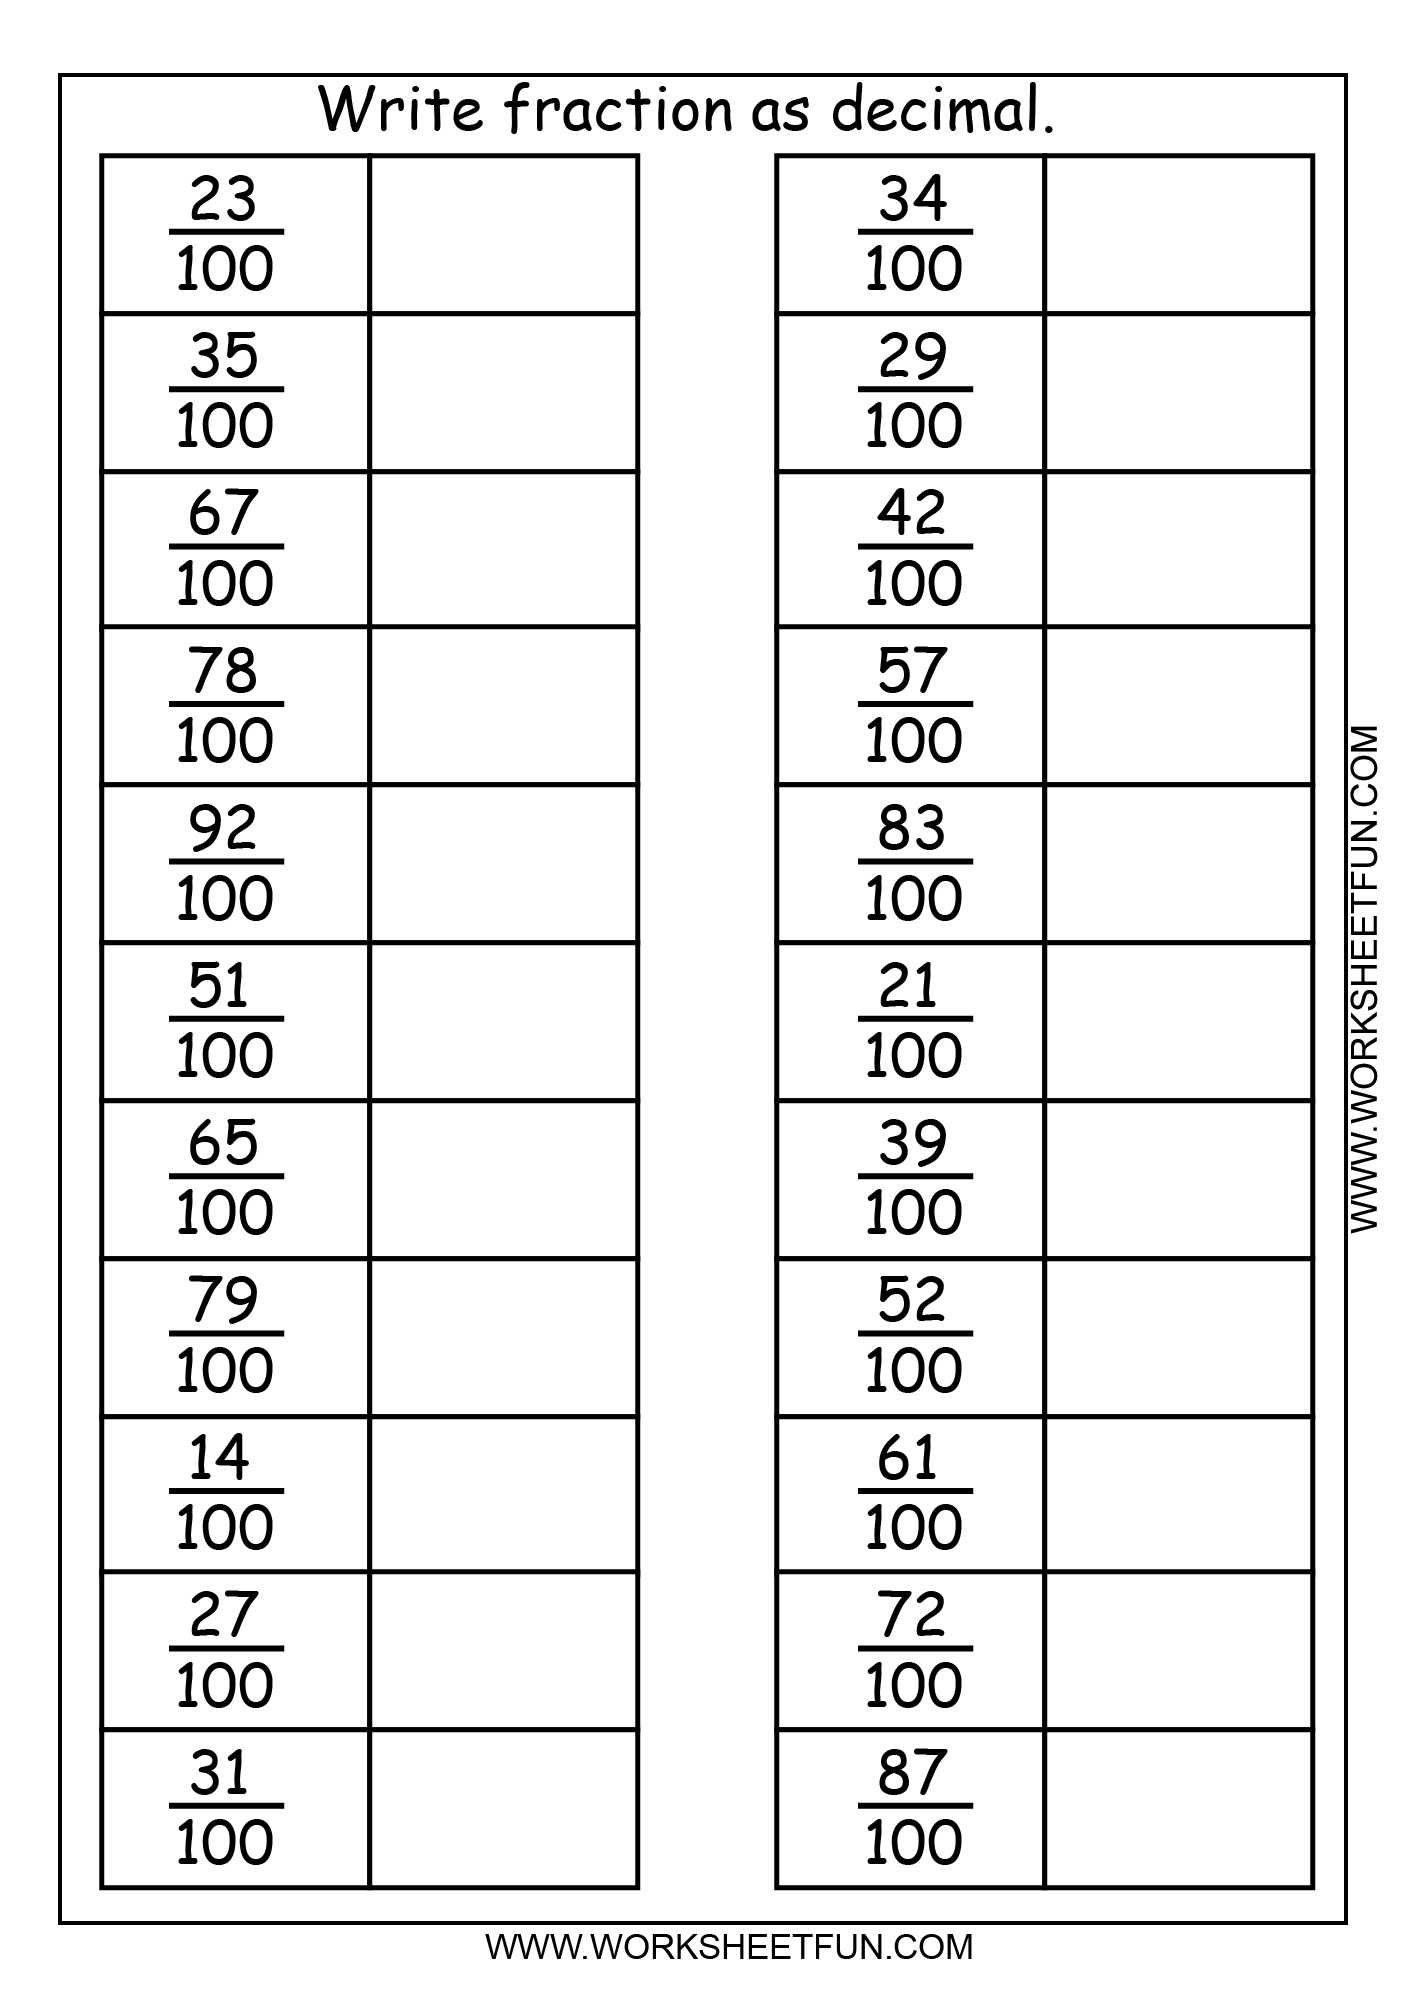 Maths Percentages Worksheets Along with Decimals Fraction Decimal and Percent Worksheet as Printable